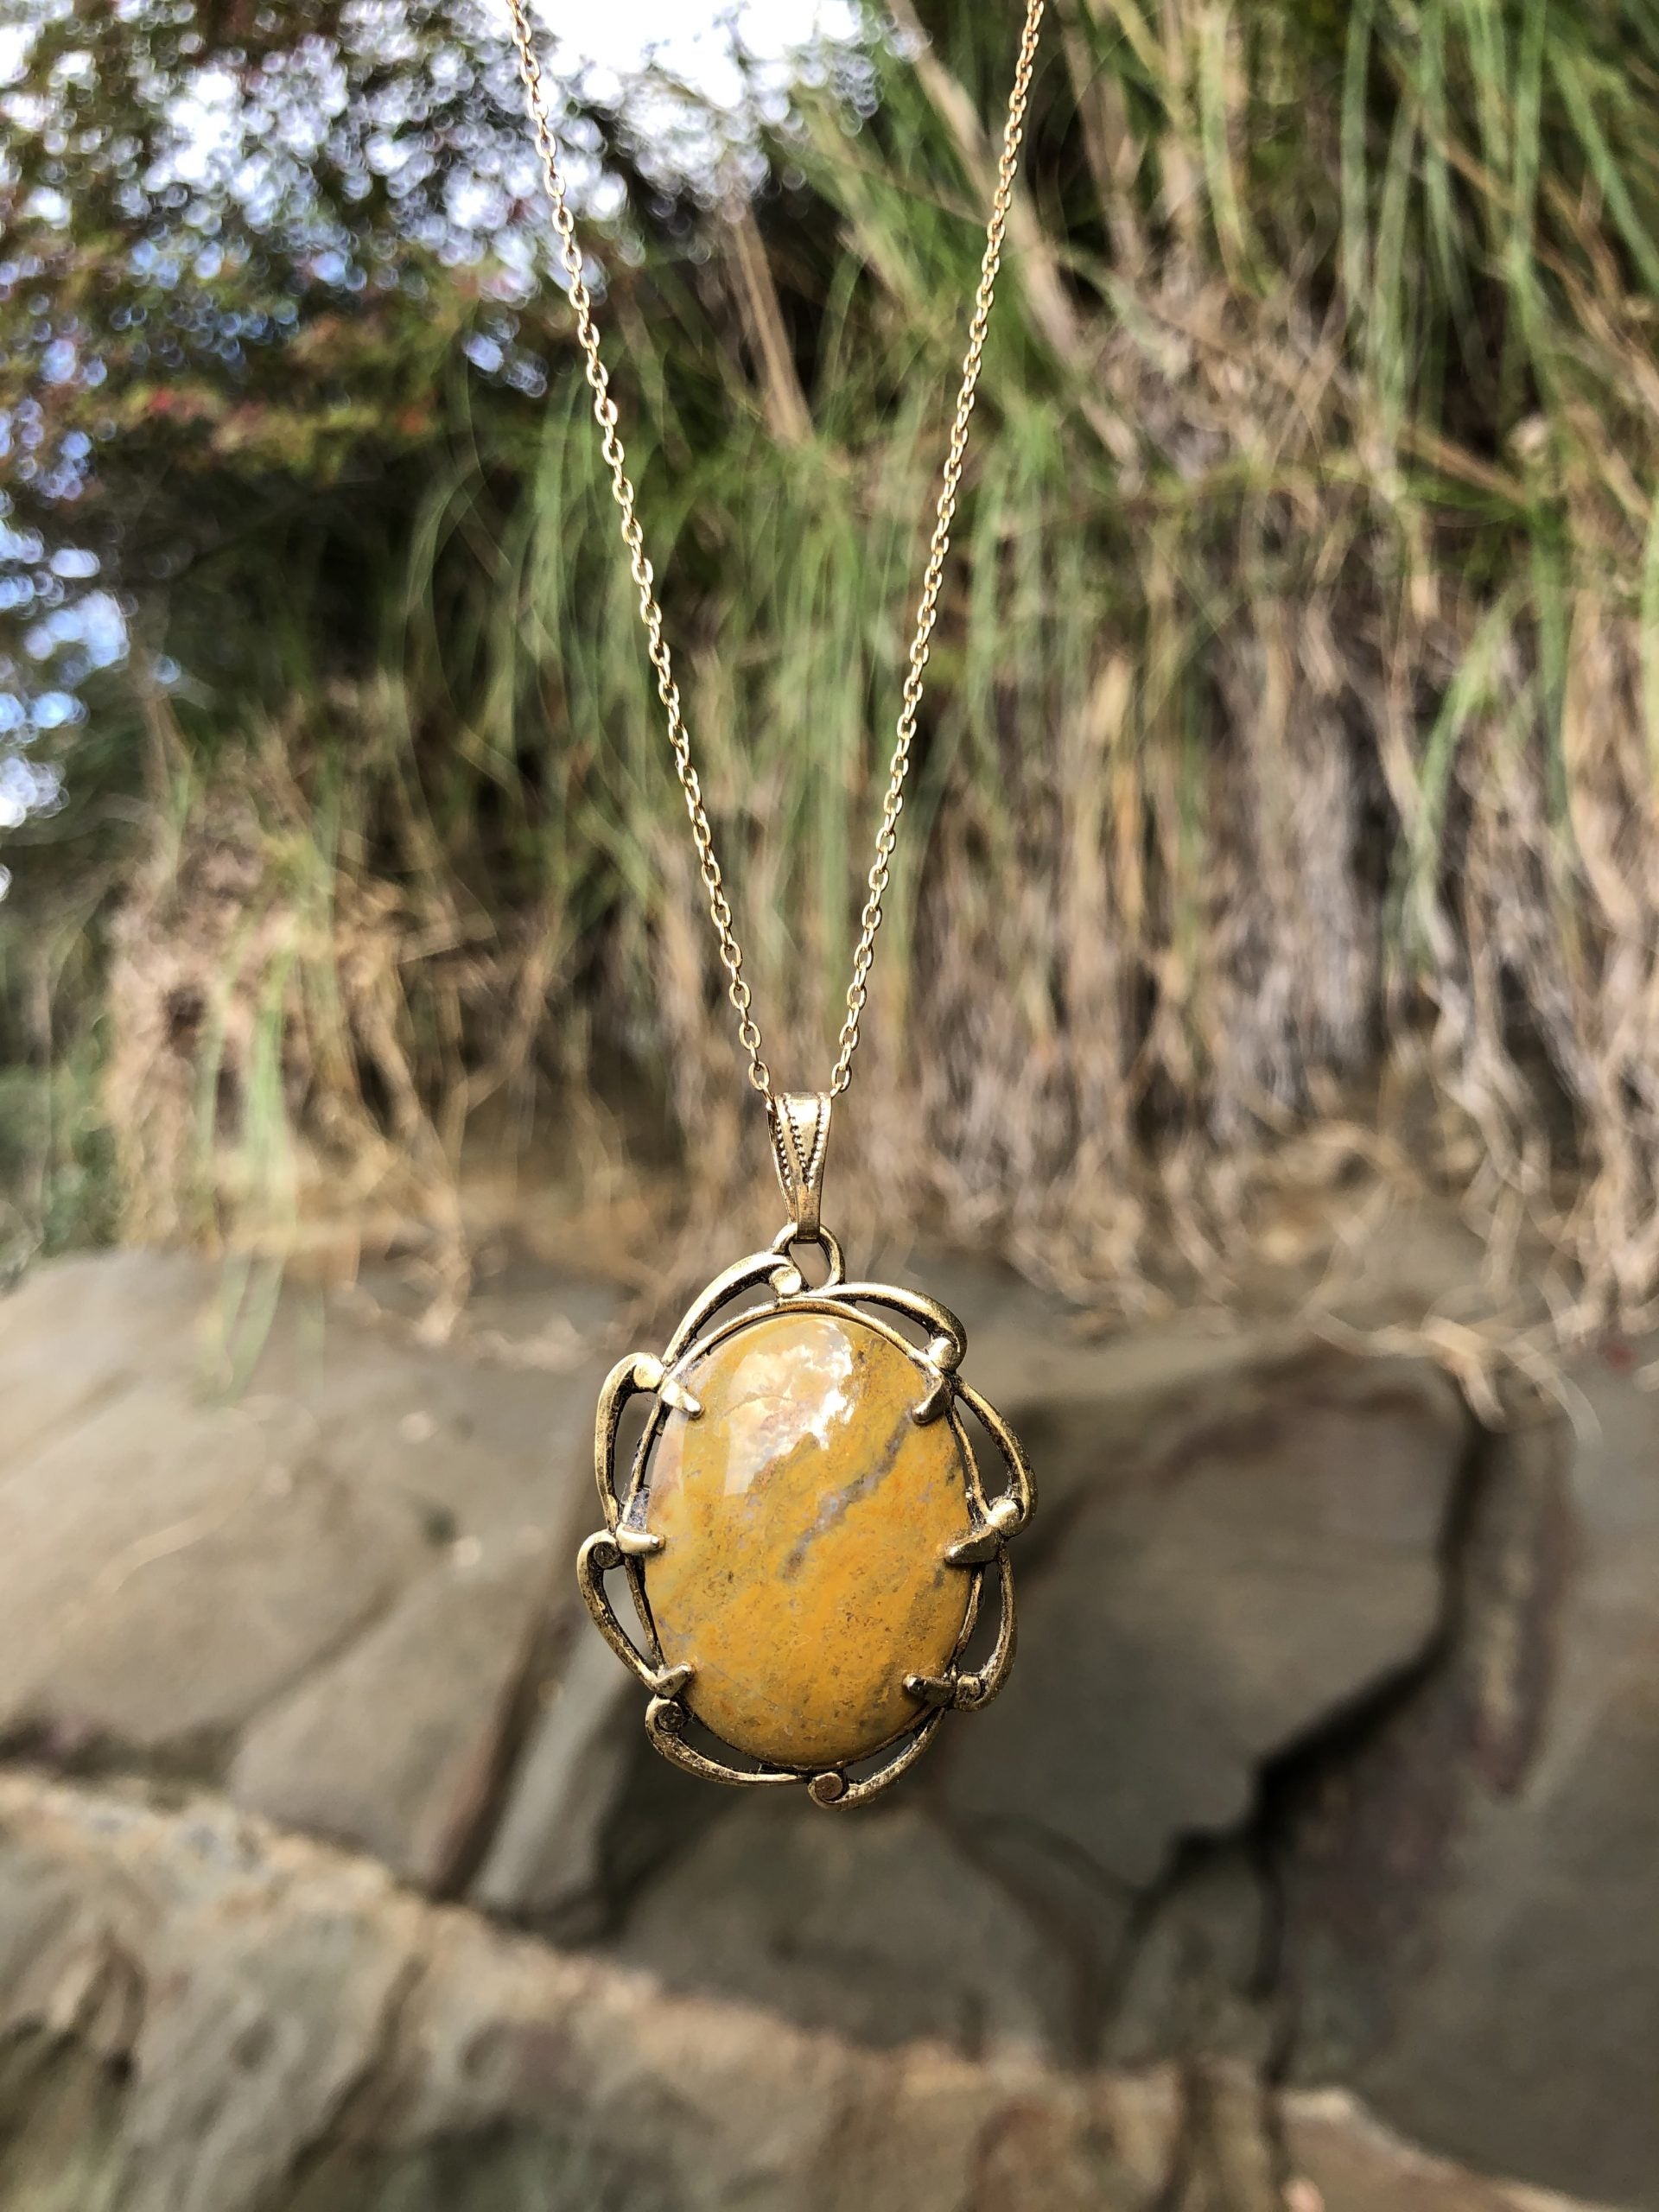 Necklace with New Zealand petrified wood, yellow with brown markings, hand polished to a 30x22mm cabochon and set in a gold plated setting with 19 inch chain, on beach